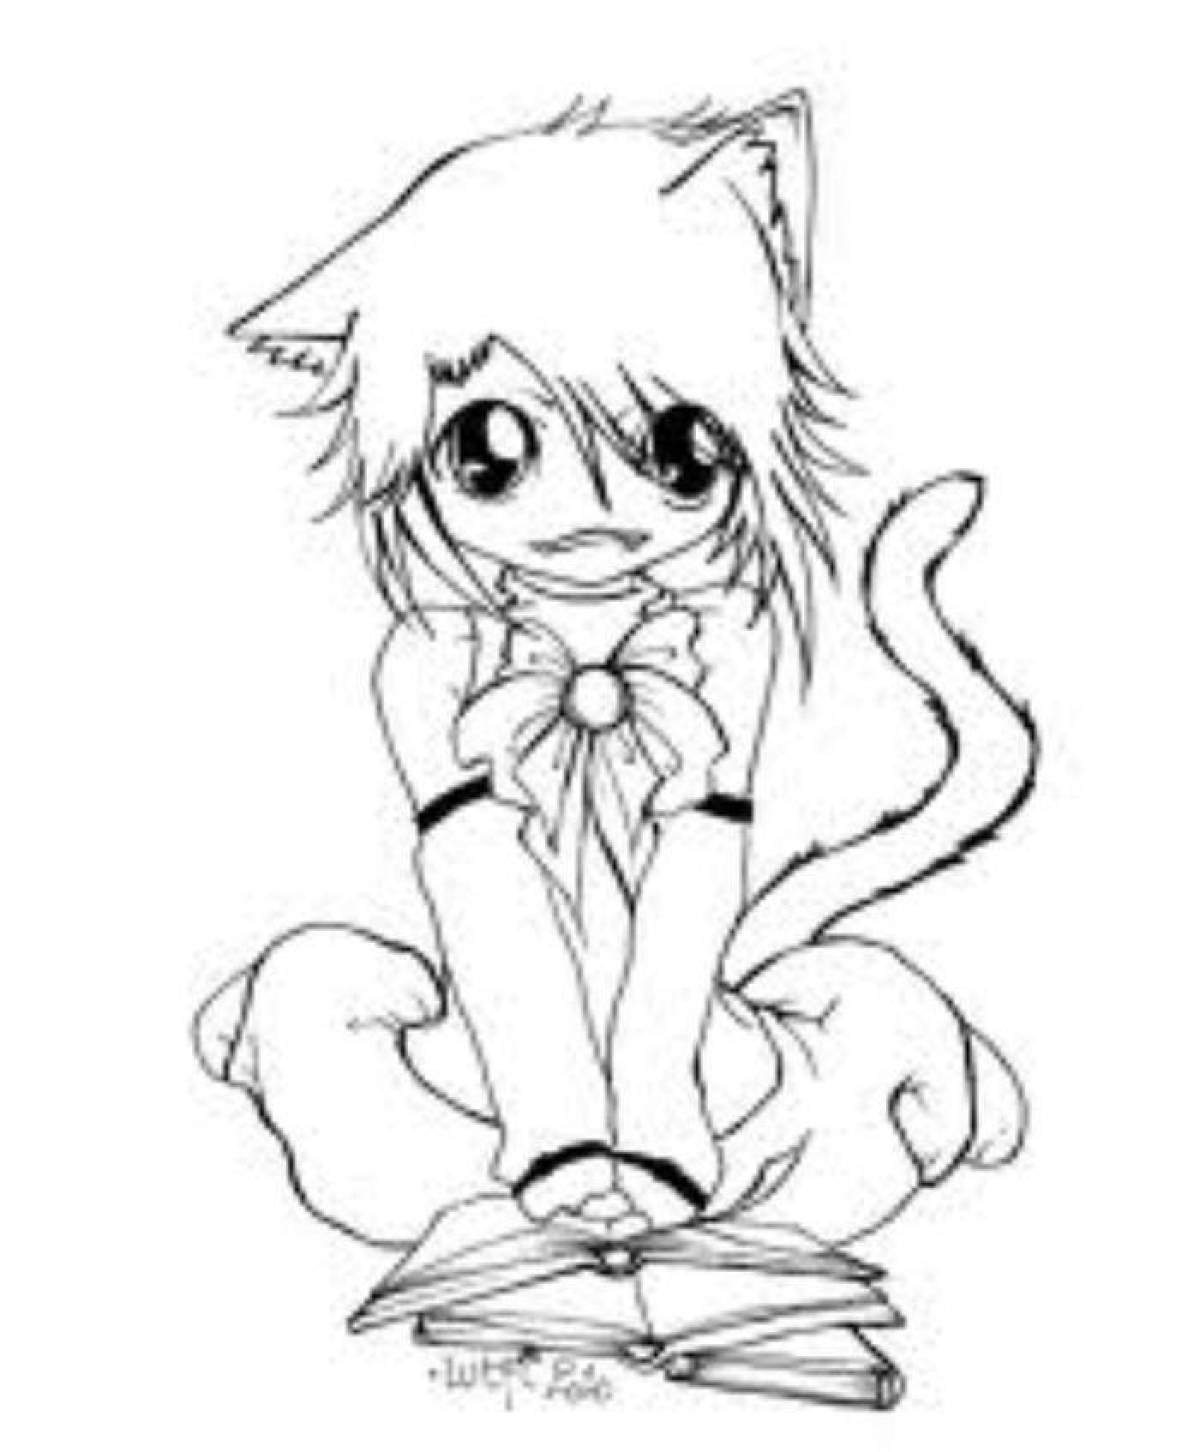 Live anime cat coloring book